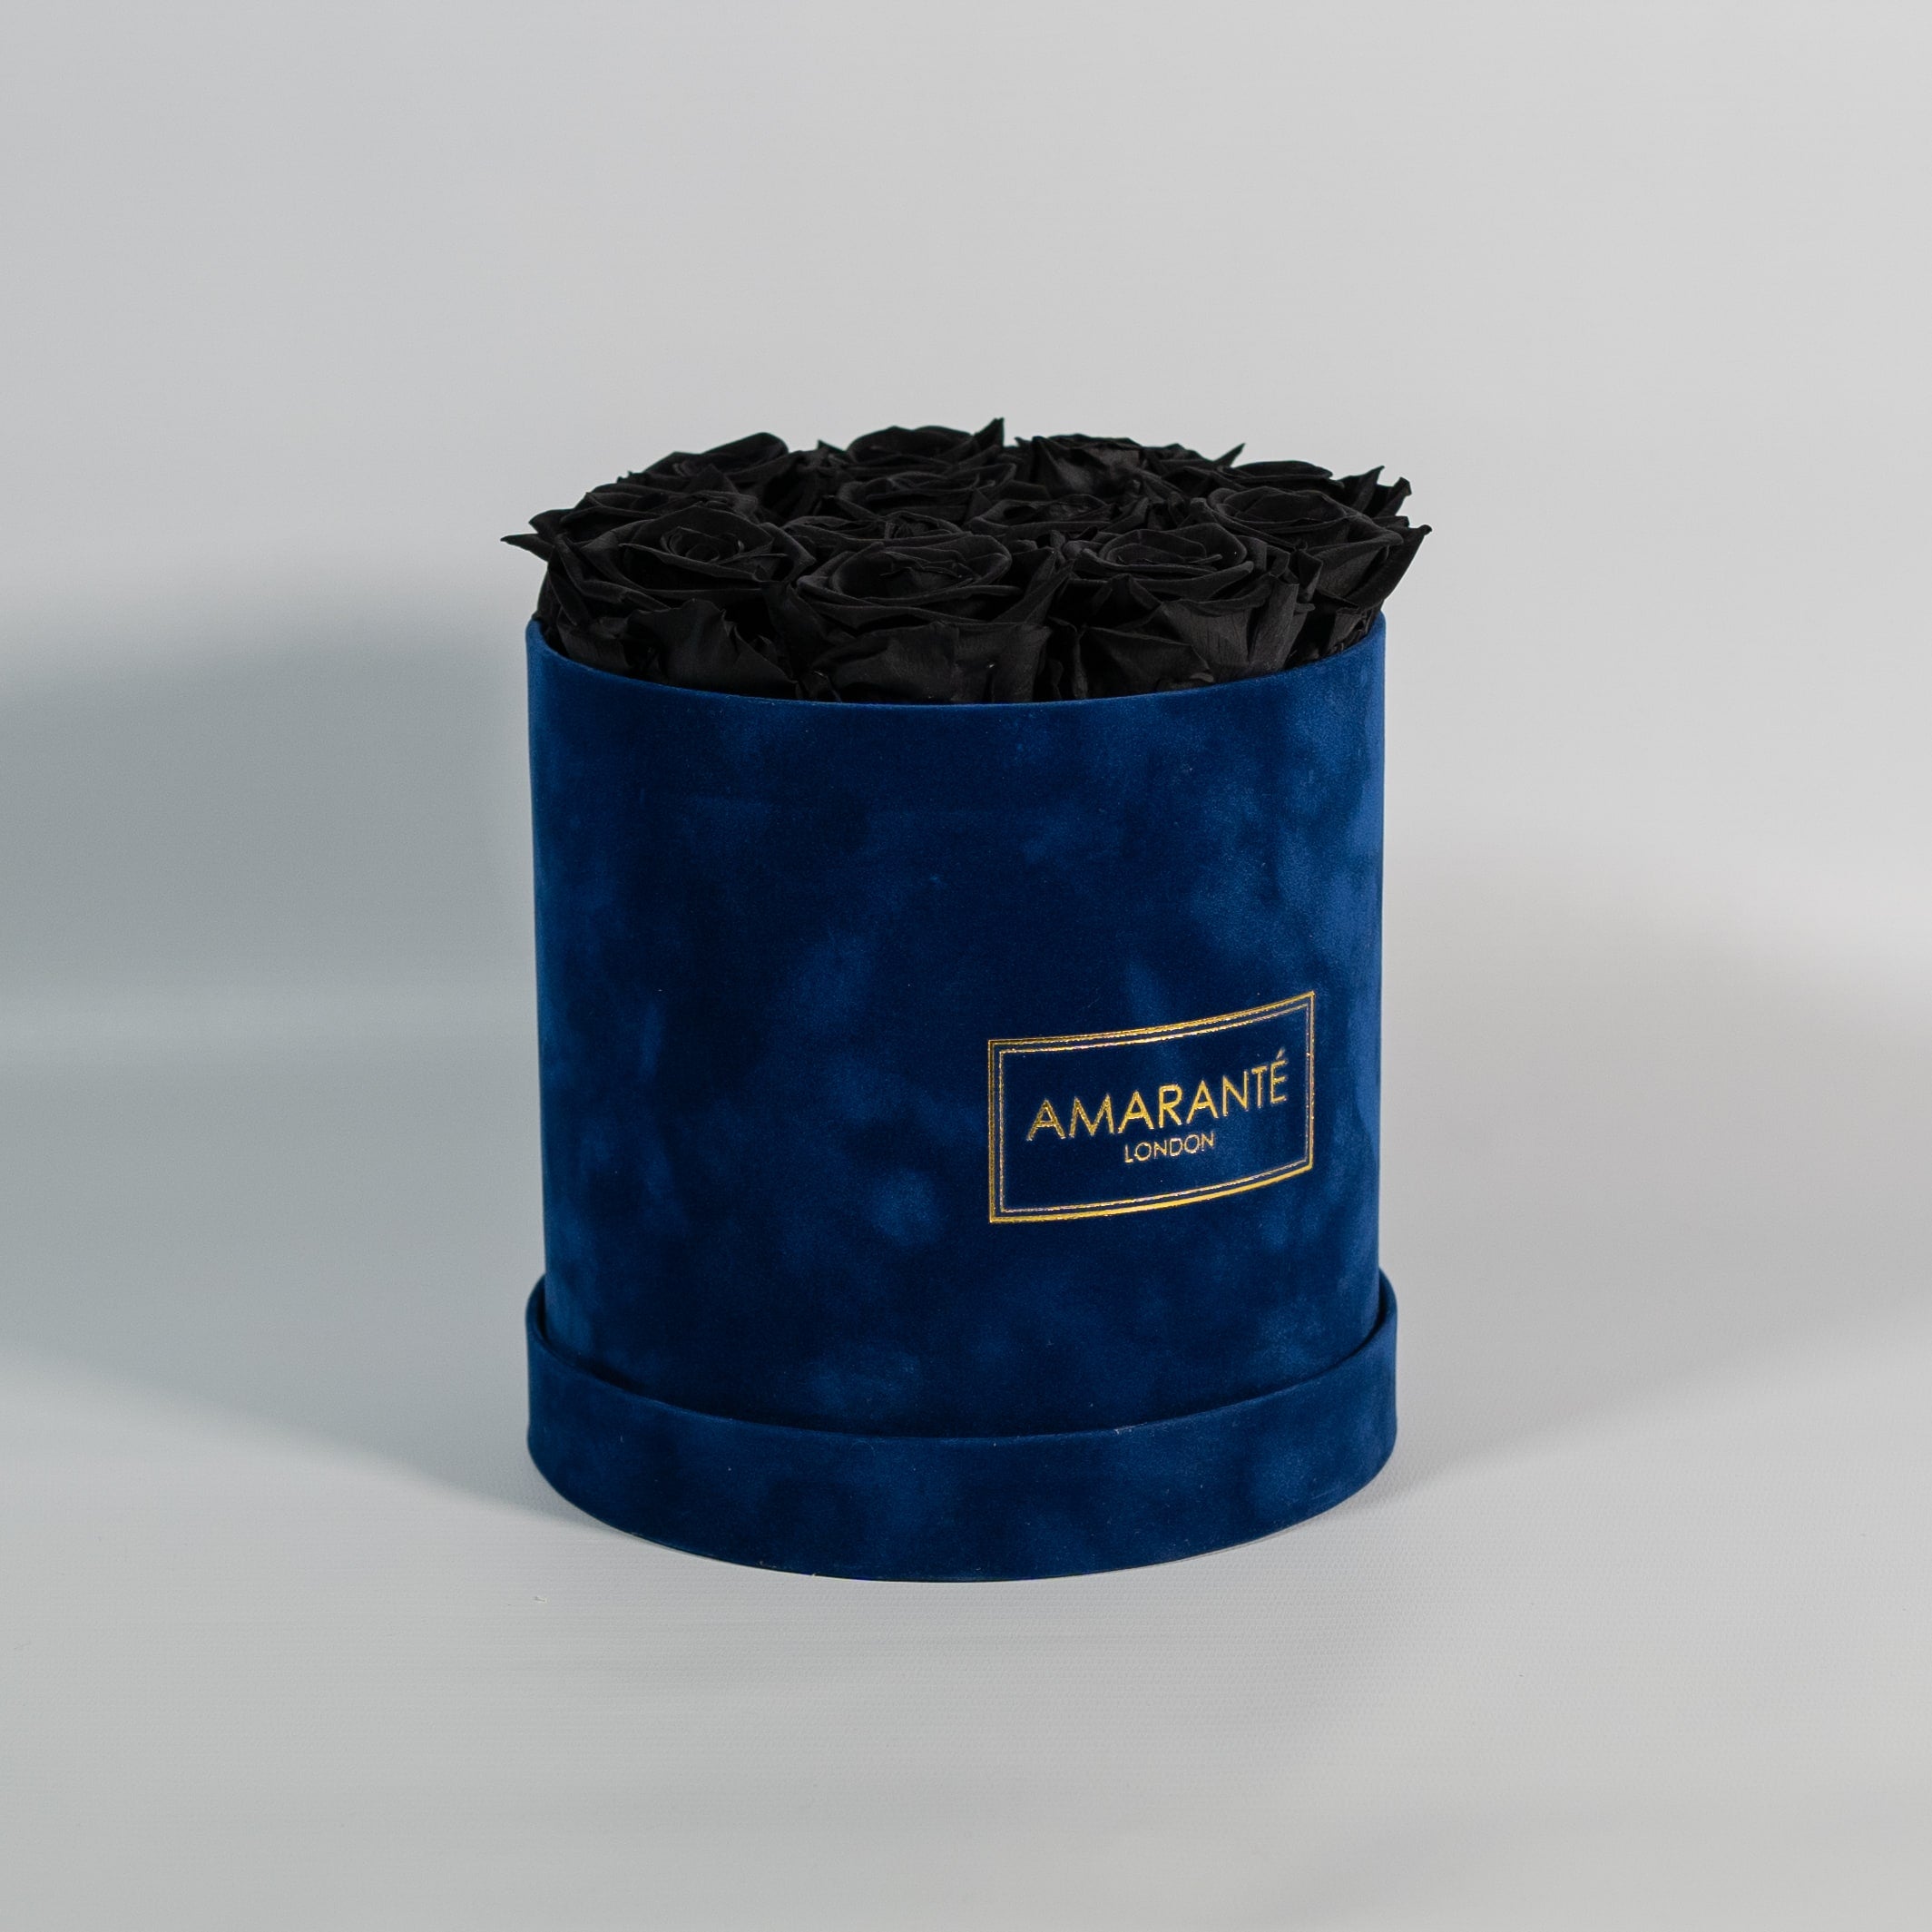 Bold black Roses encompassed in a gorgeous blue box 